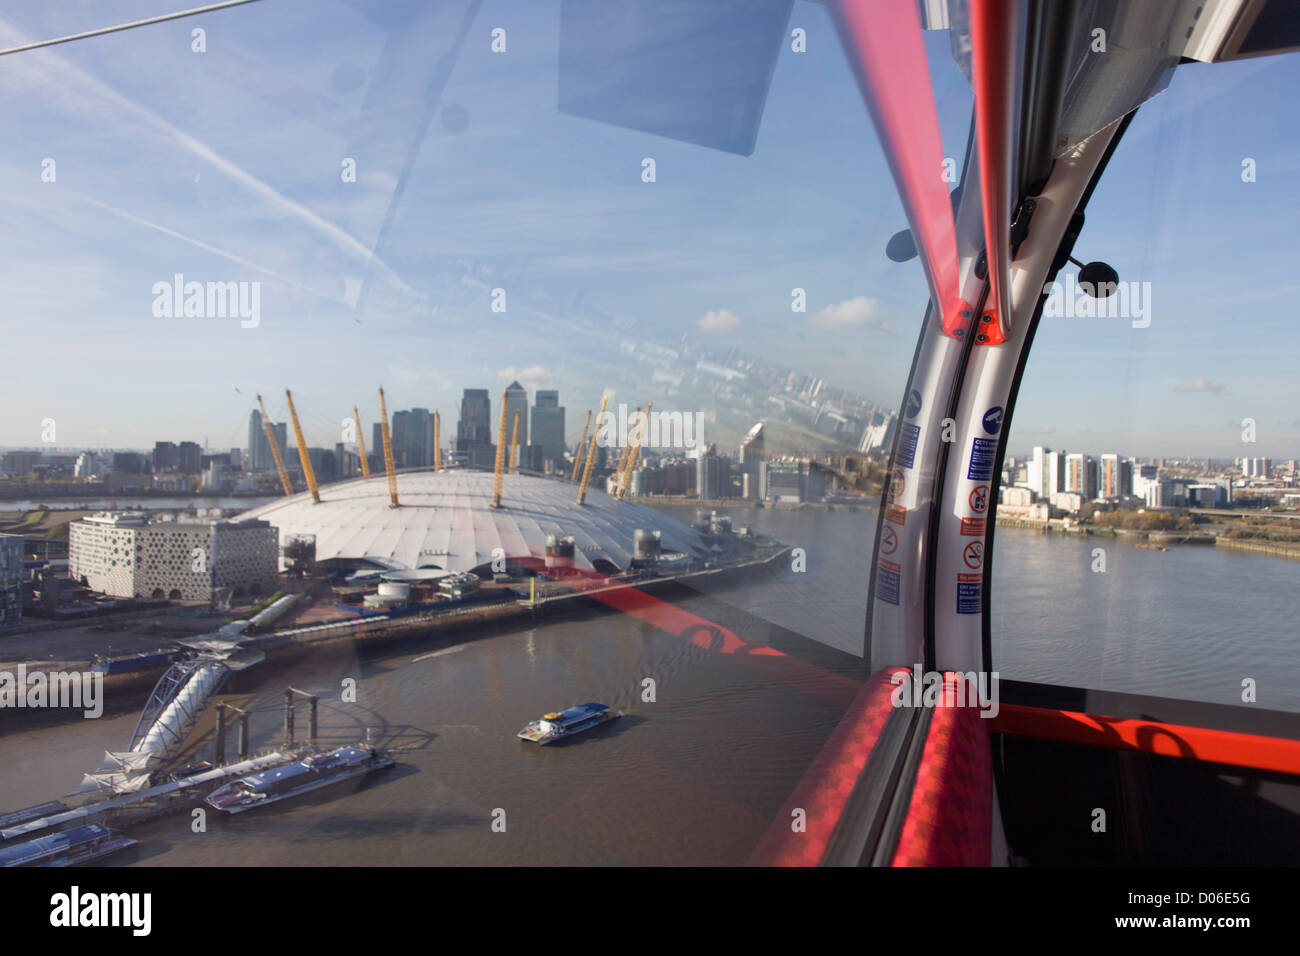 The southbound view from a gondola on a journey over the River Thames on the Emirates Cable Car, from Royal Docks towards the o2 arena on the Greenwich Peninsular. There are 34 gondolas, each with a maximum capacity of 10 passengers. The Emirates Air Line (also known as the Thames cable car) is a cable car link across the River Thames in London built with sponsorship from the airline Emirates. The service opened on 28 June 2012 and is operated by Transport for London. Stock Photo